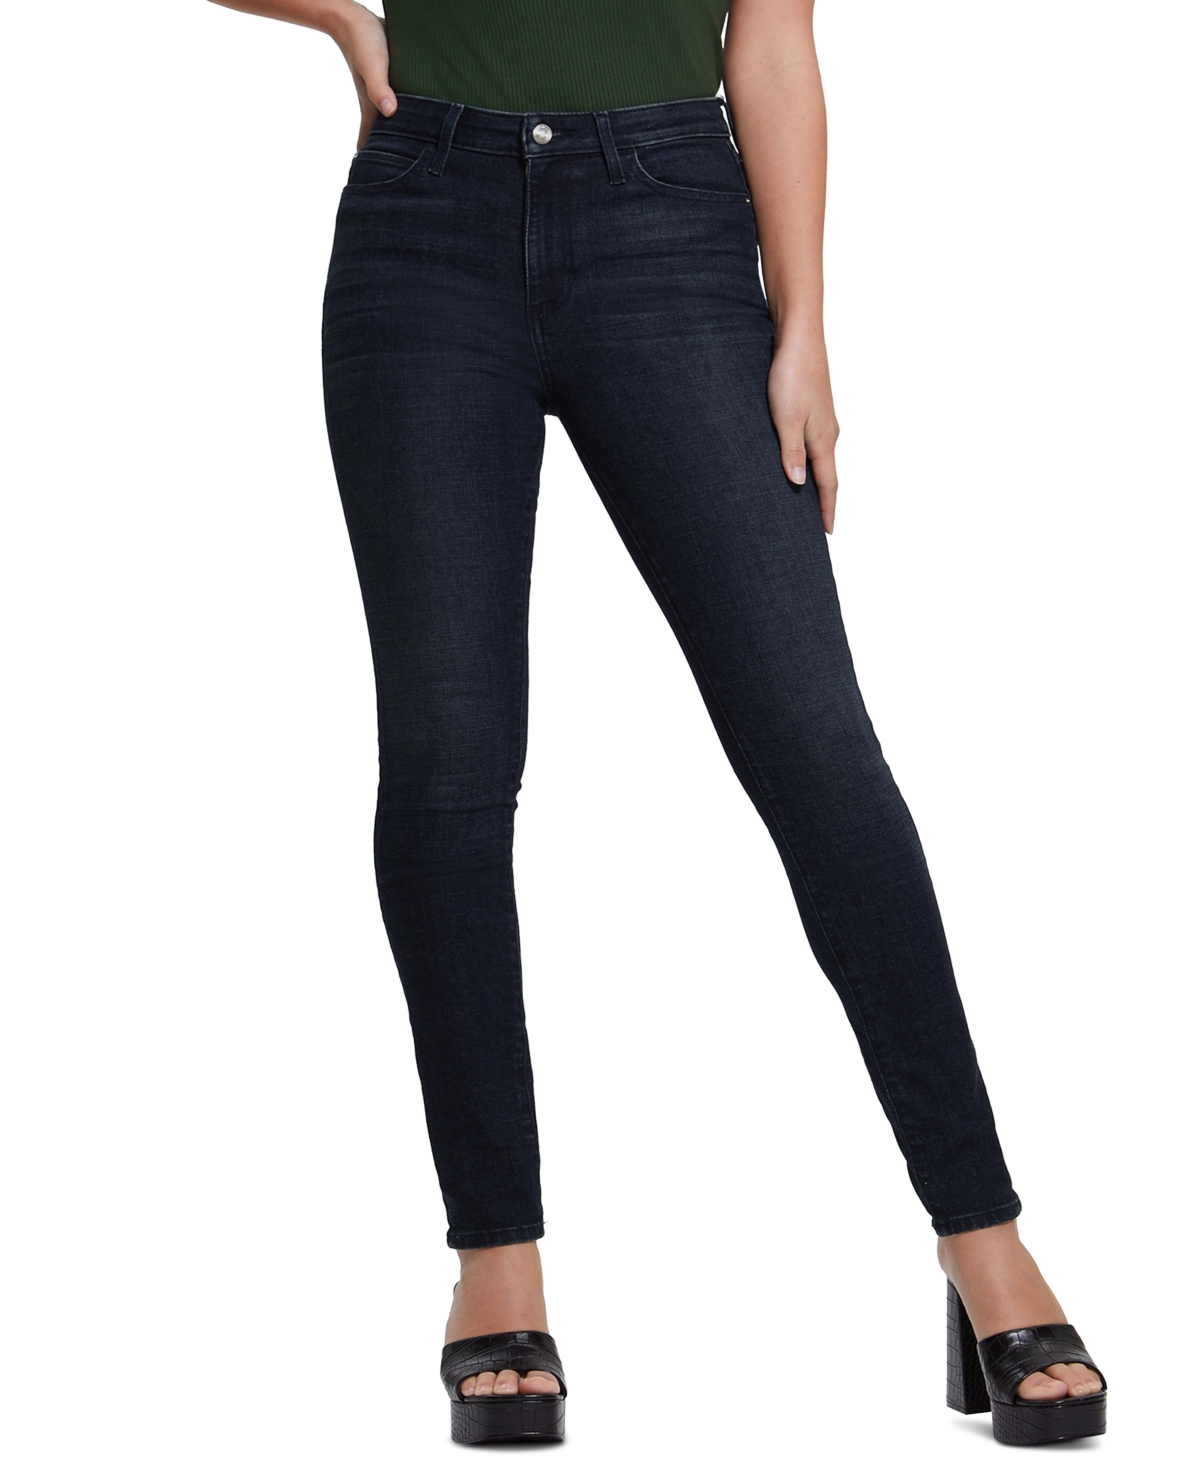 GUESS WOMEN'S ECO 1981 SKINNY JEANS